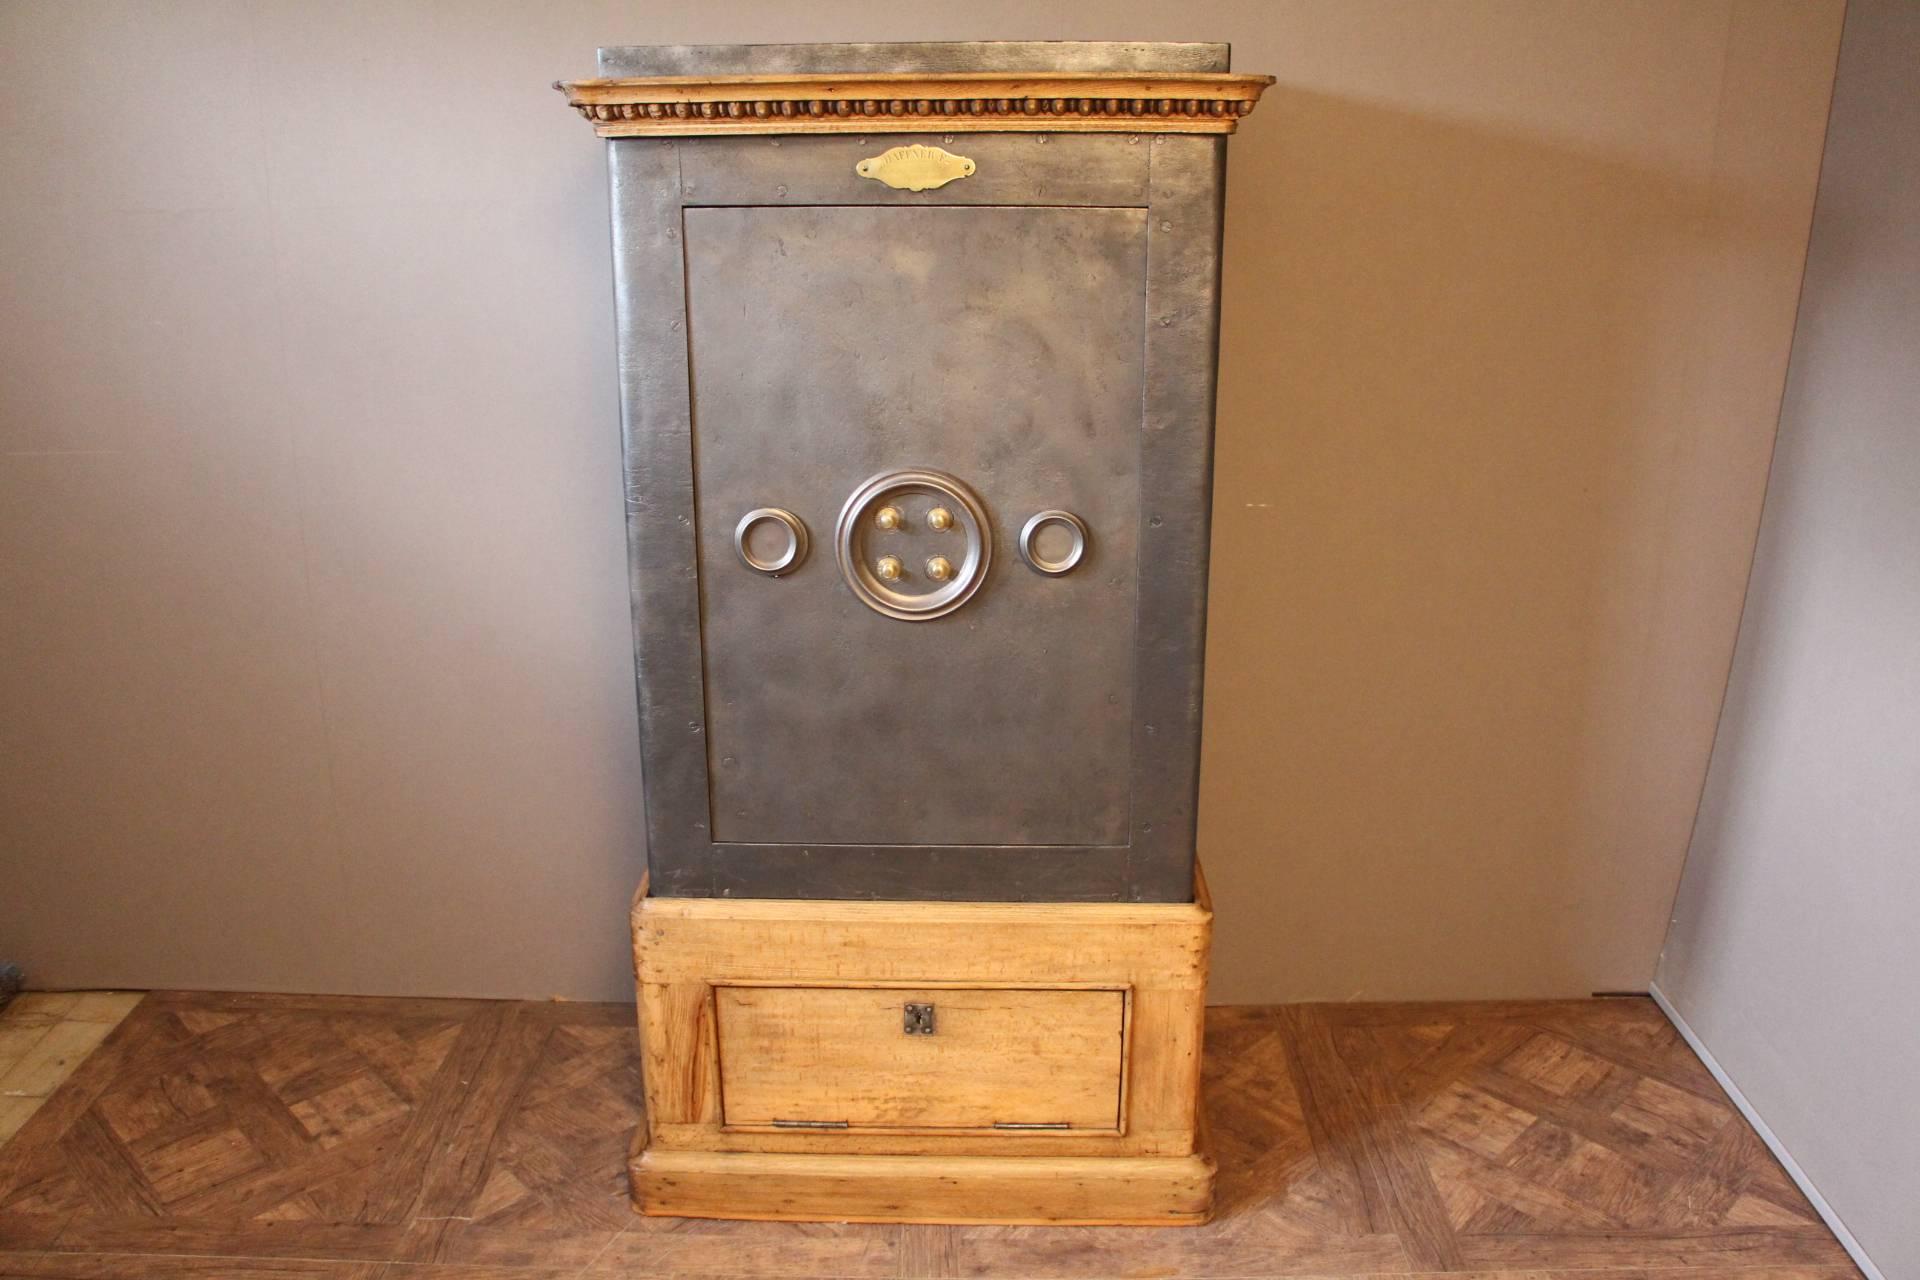 Late 19th Century Large Black Steel, Iron and Wood Safe with Keys and Working Combination